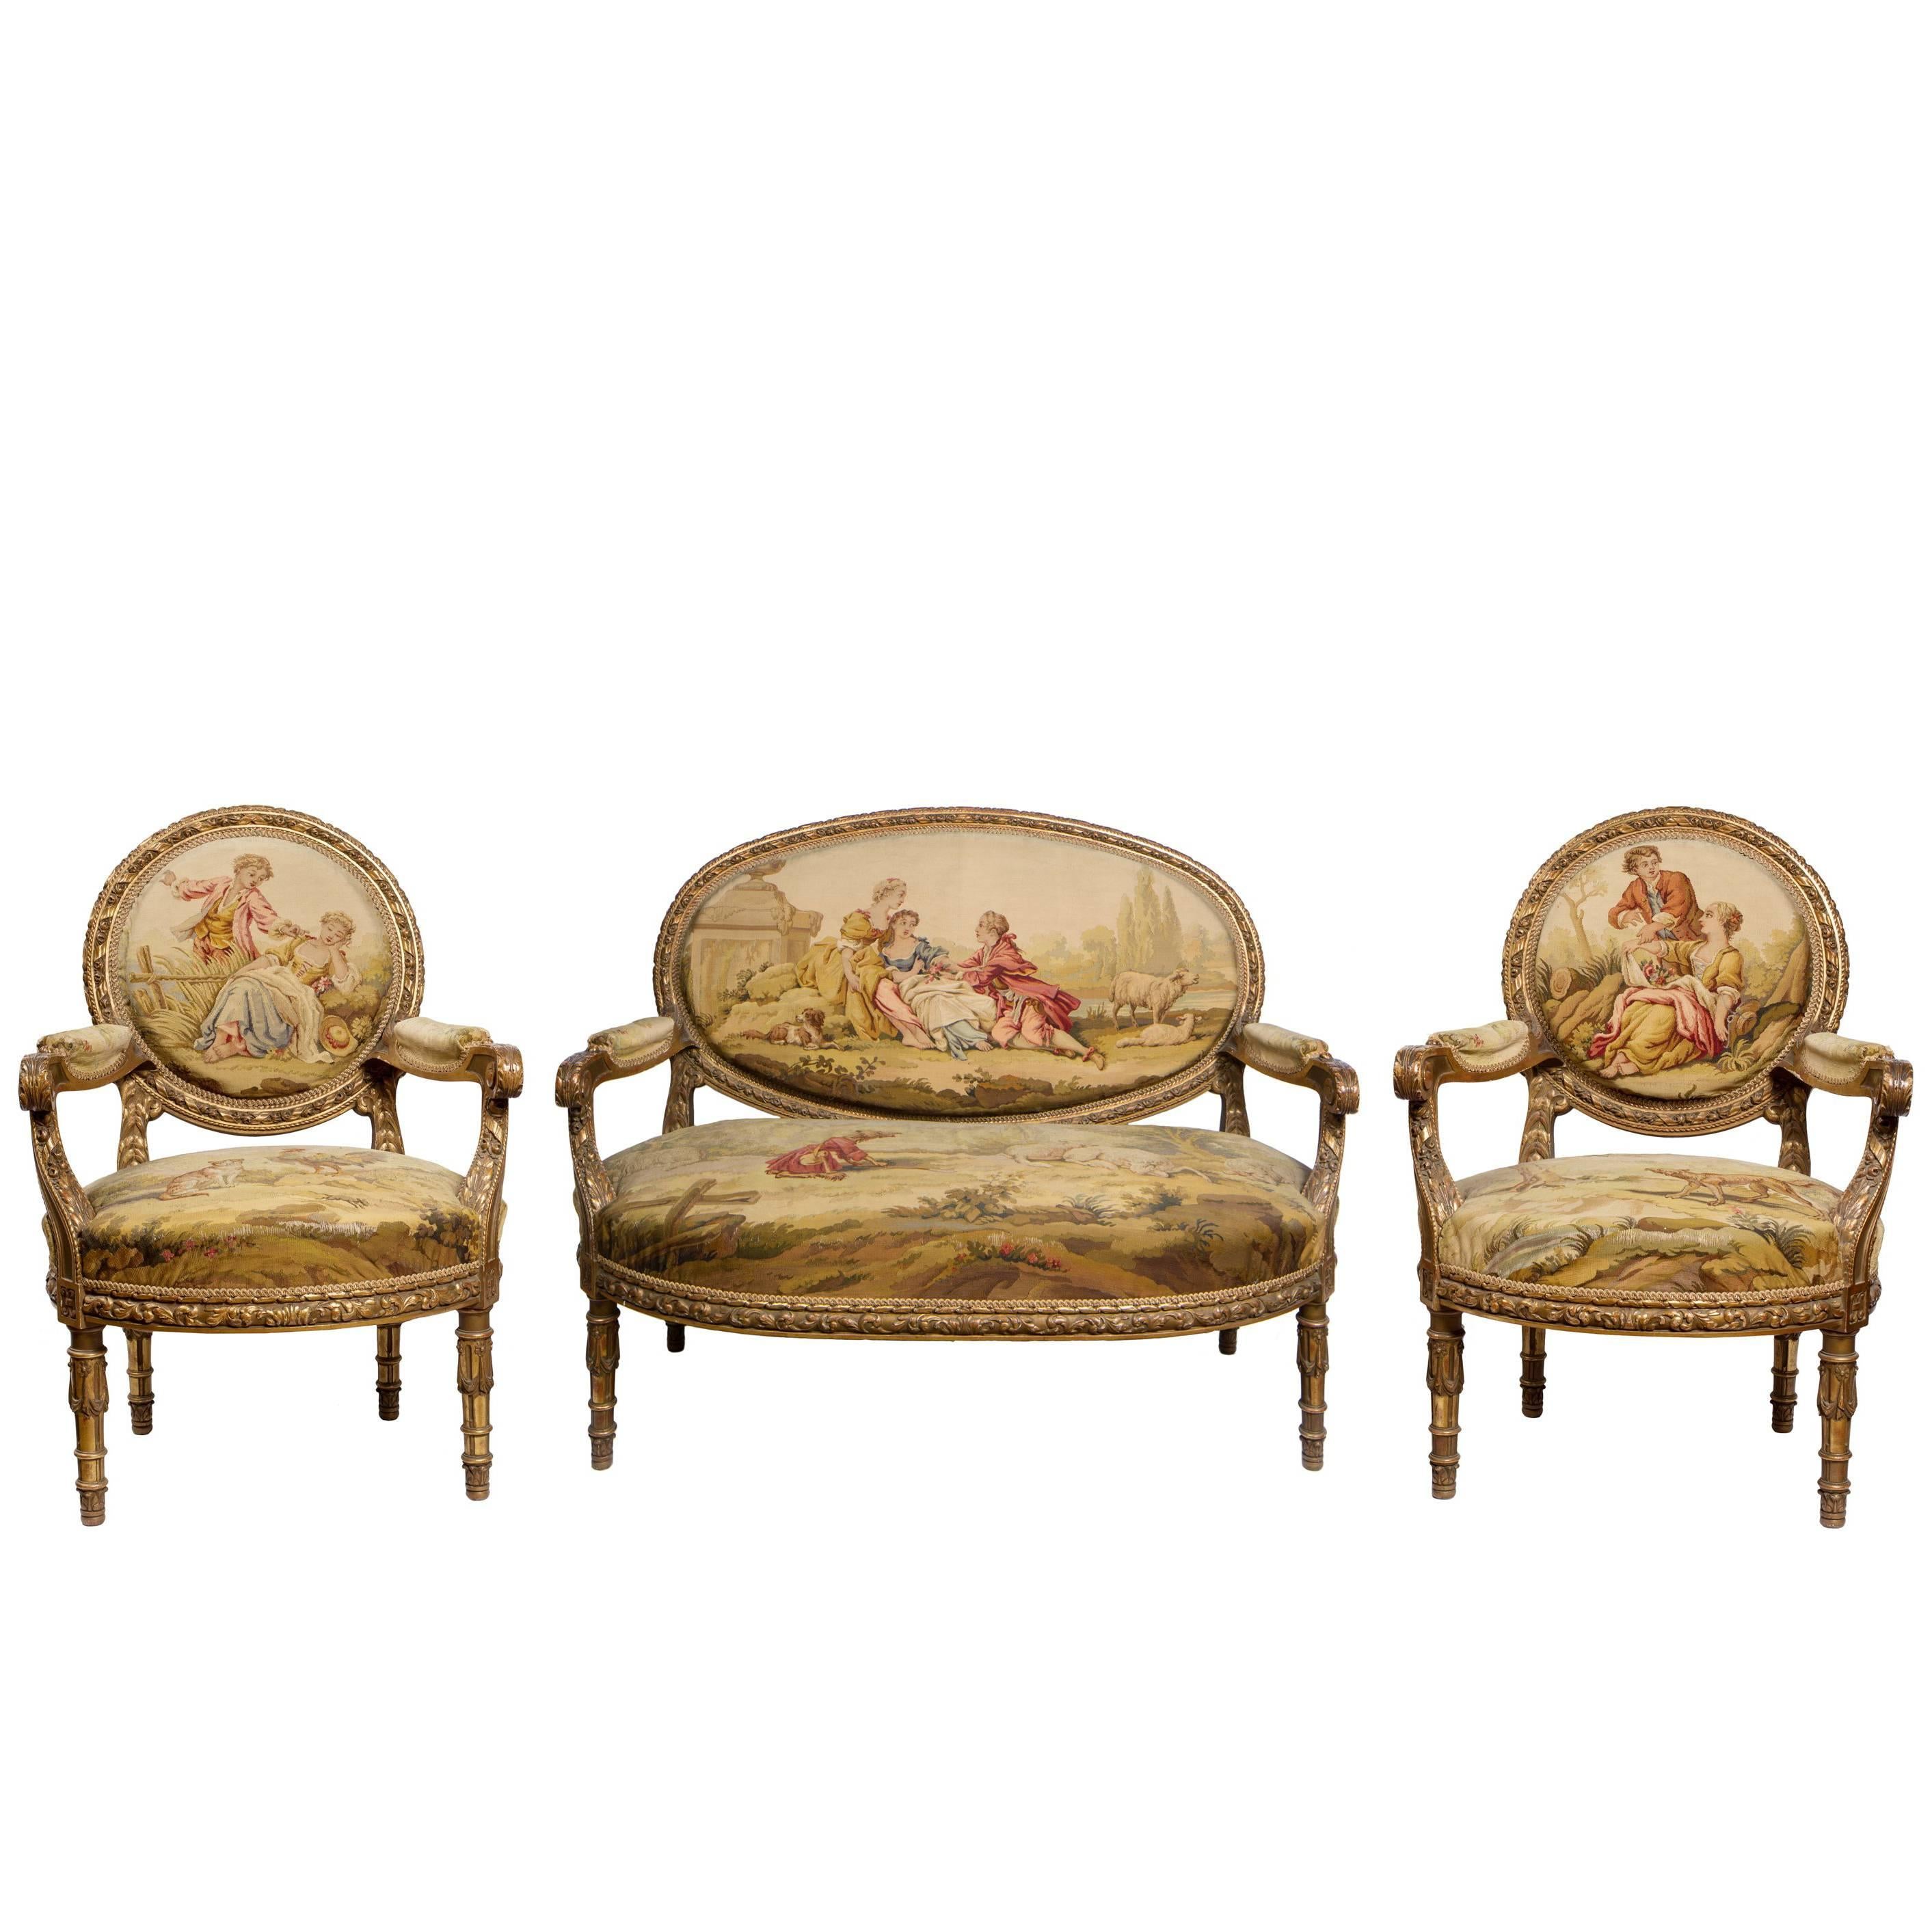 19th� Century French Aubusson Carved Giltwood Salon Suite with Settee and Chairs